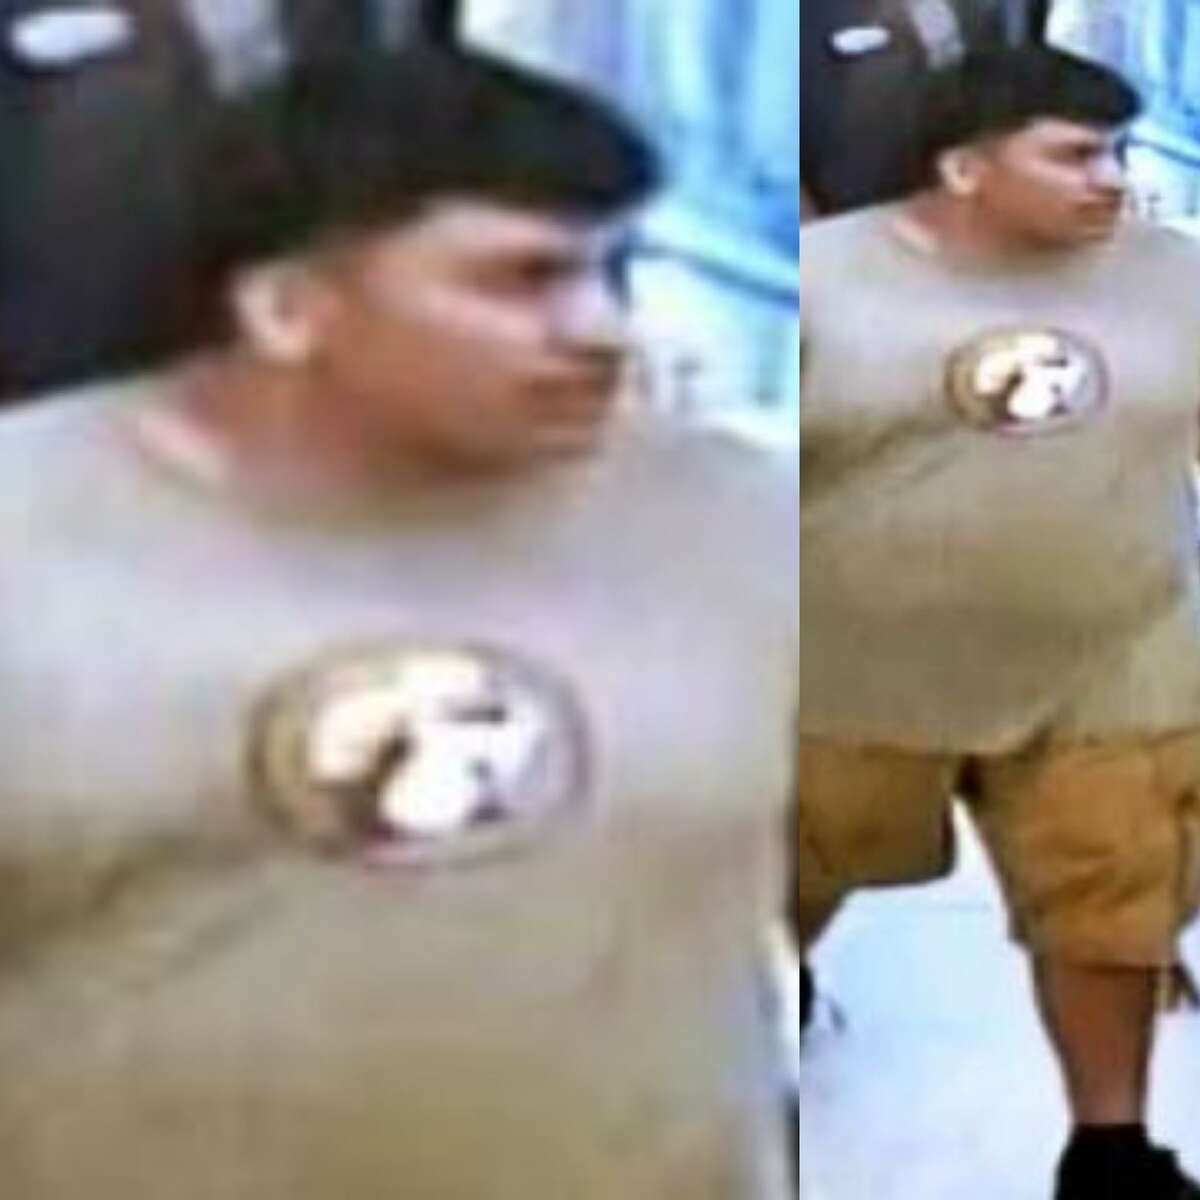 A man authorities have signaled as responsible for an assault in New Caney is seen in a Buc-ees T-shirt.